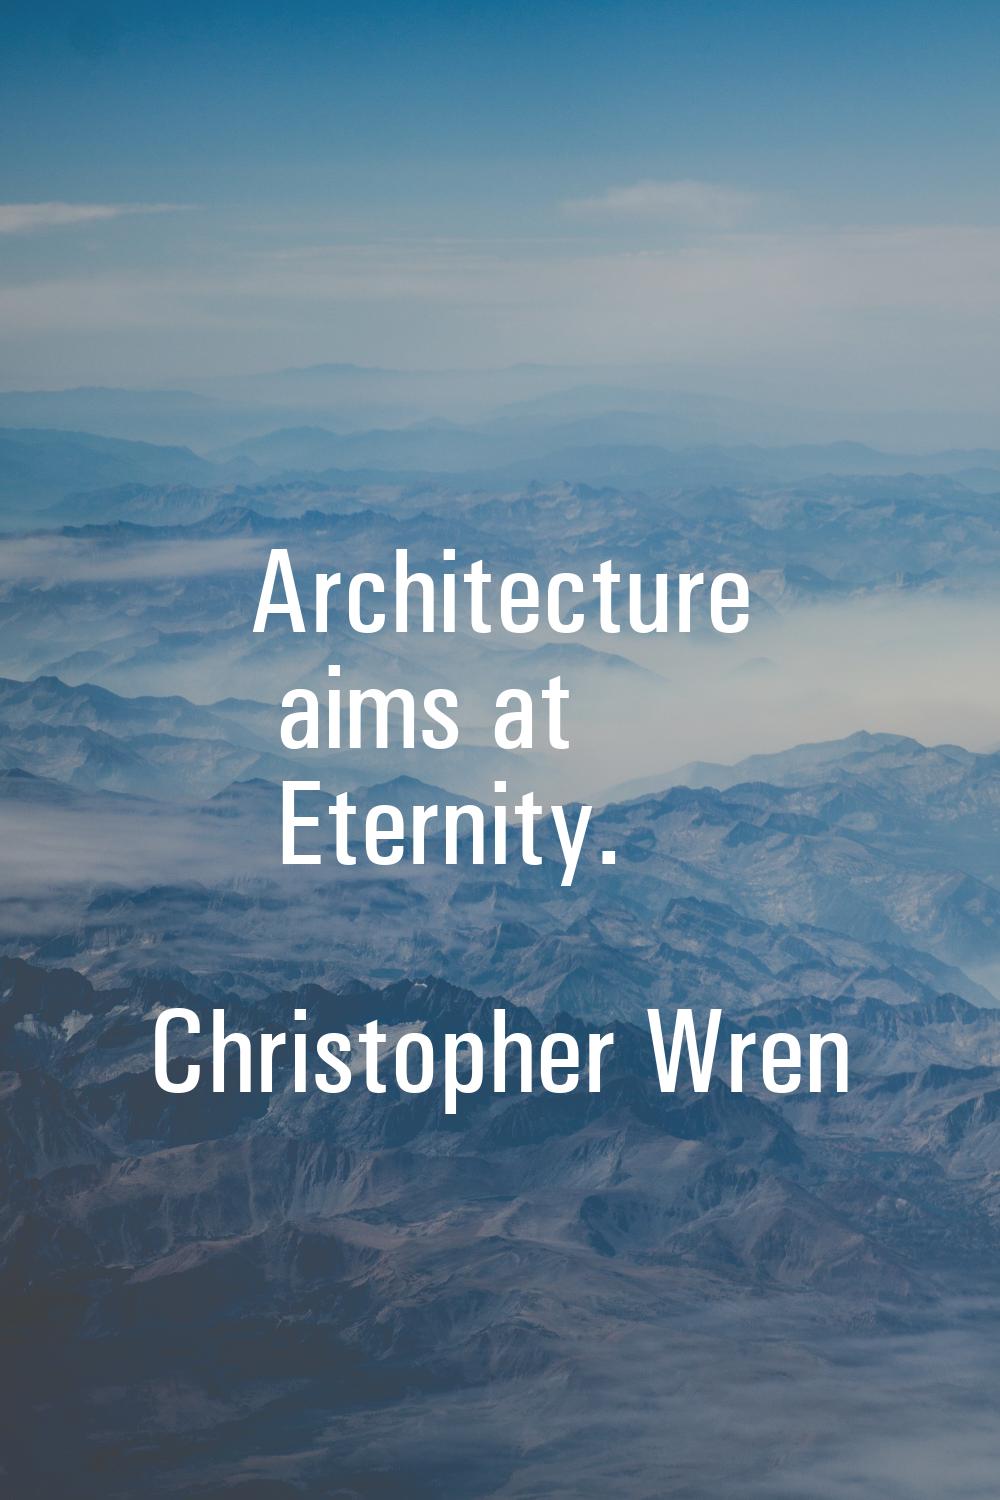 Architecture aims at Eternity.